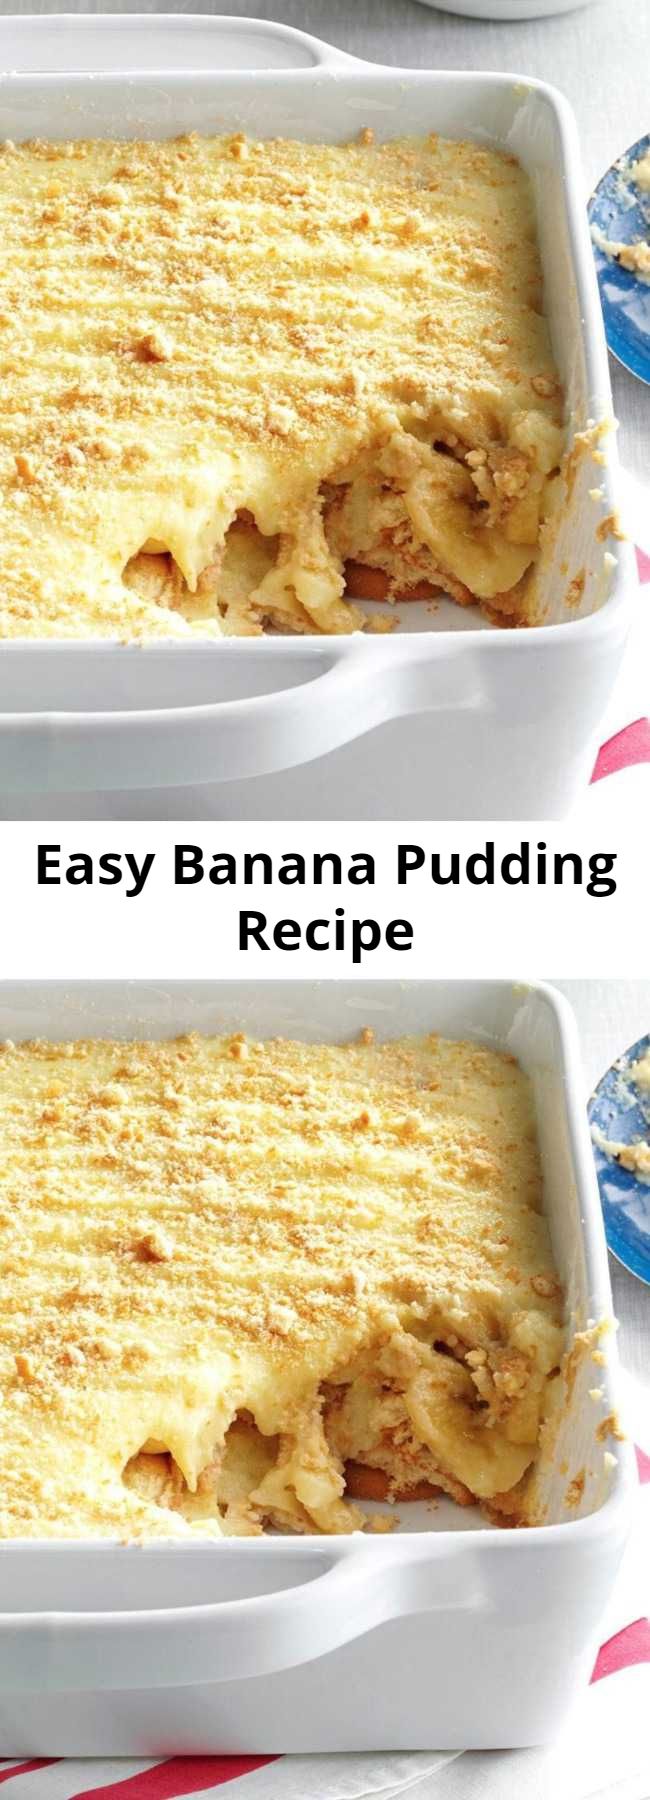 Easy Banana Pudding Recipe - It’s a dessert, but you can have it for breakfast, lunch or dinner.